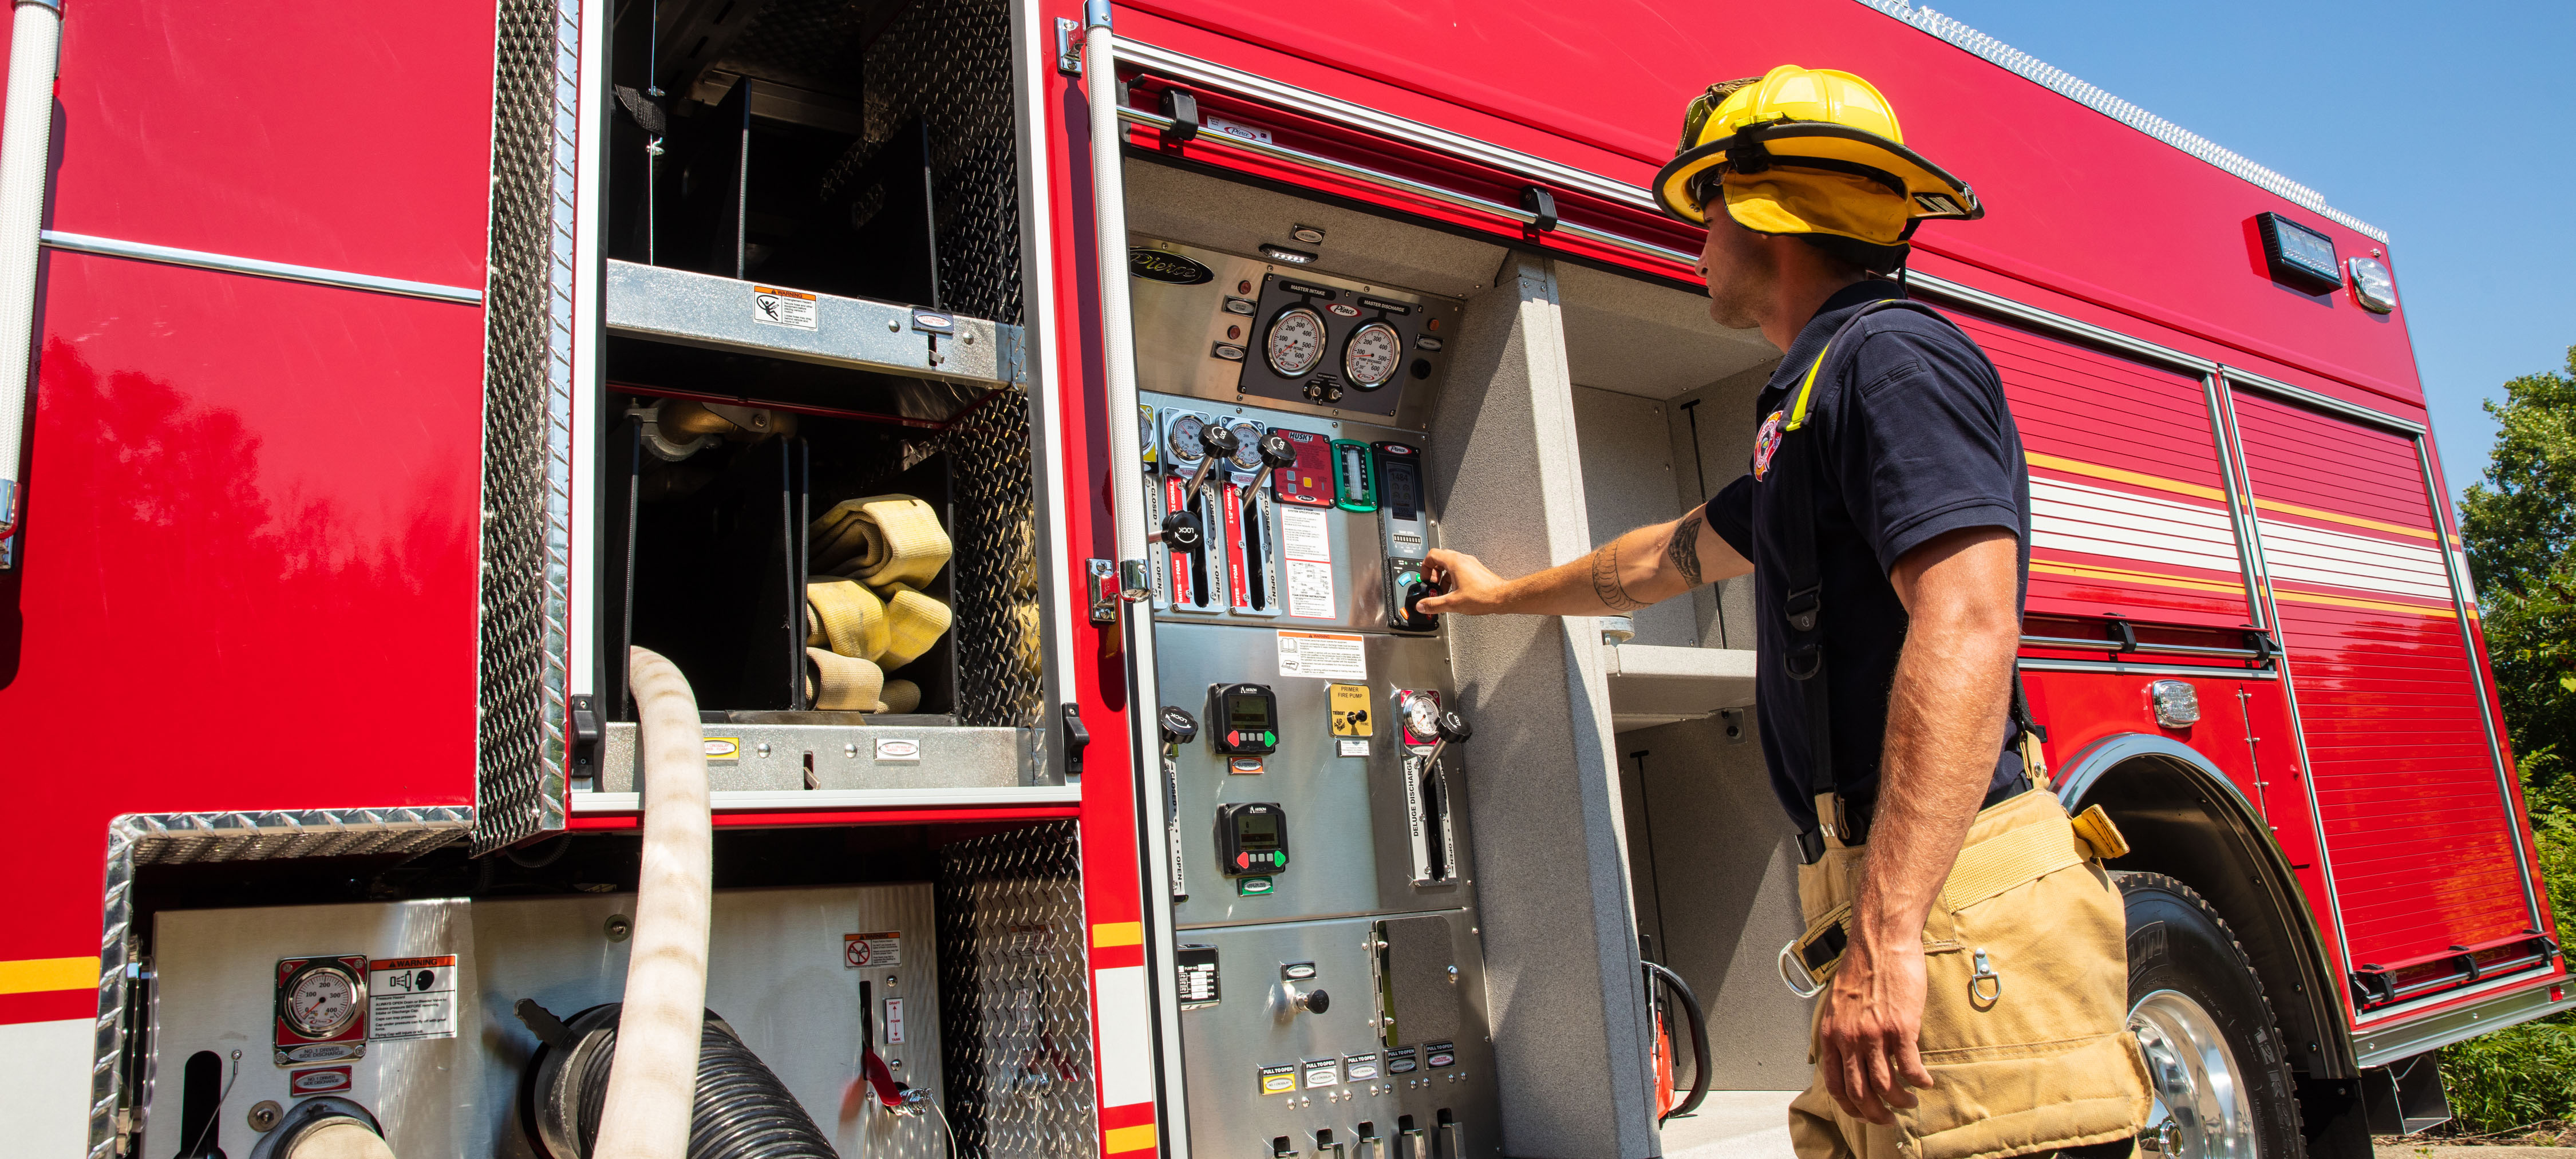 Firefighter engineer pumping at pump panel